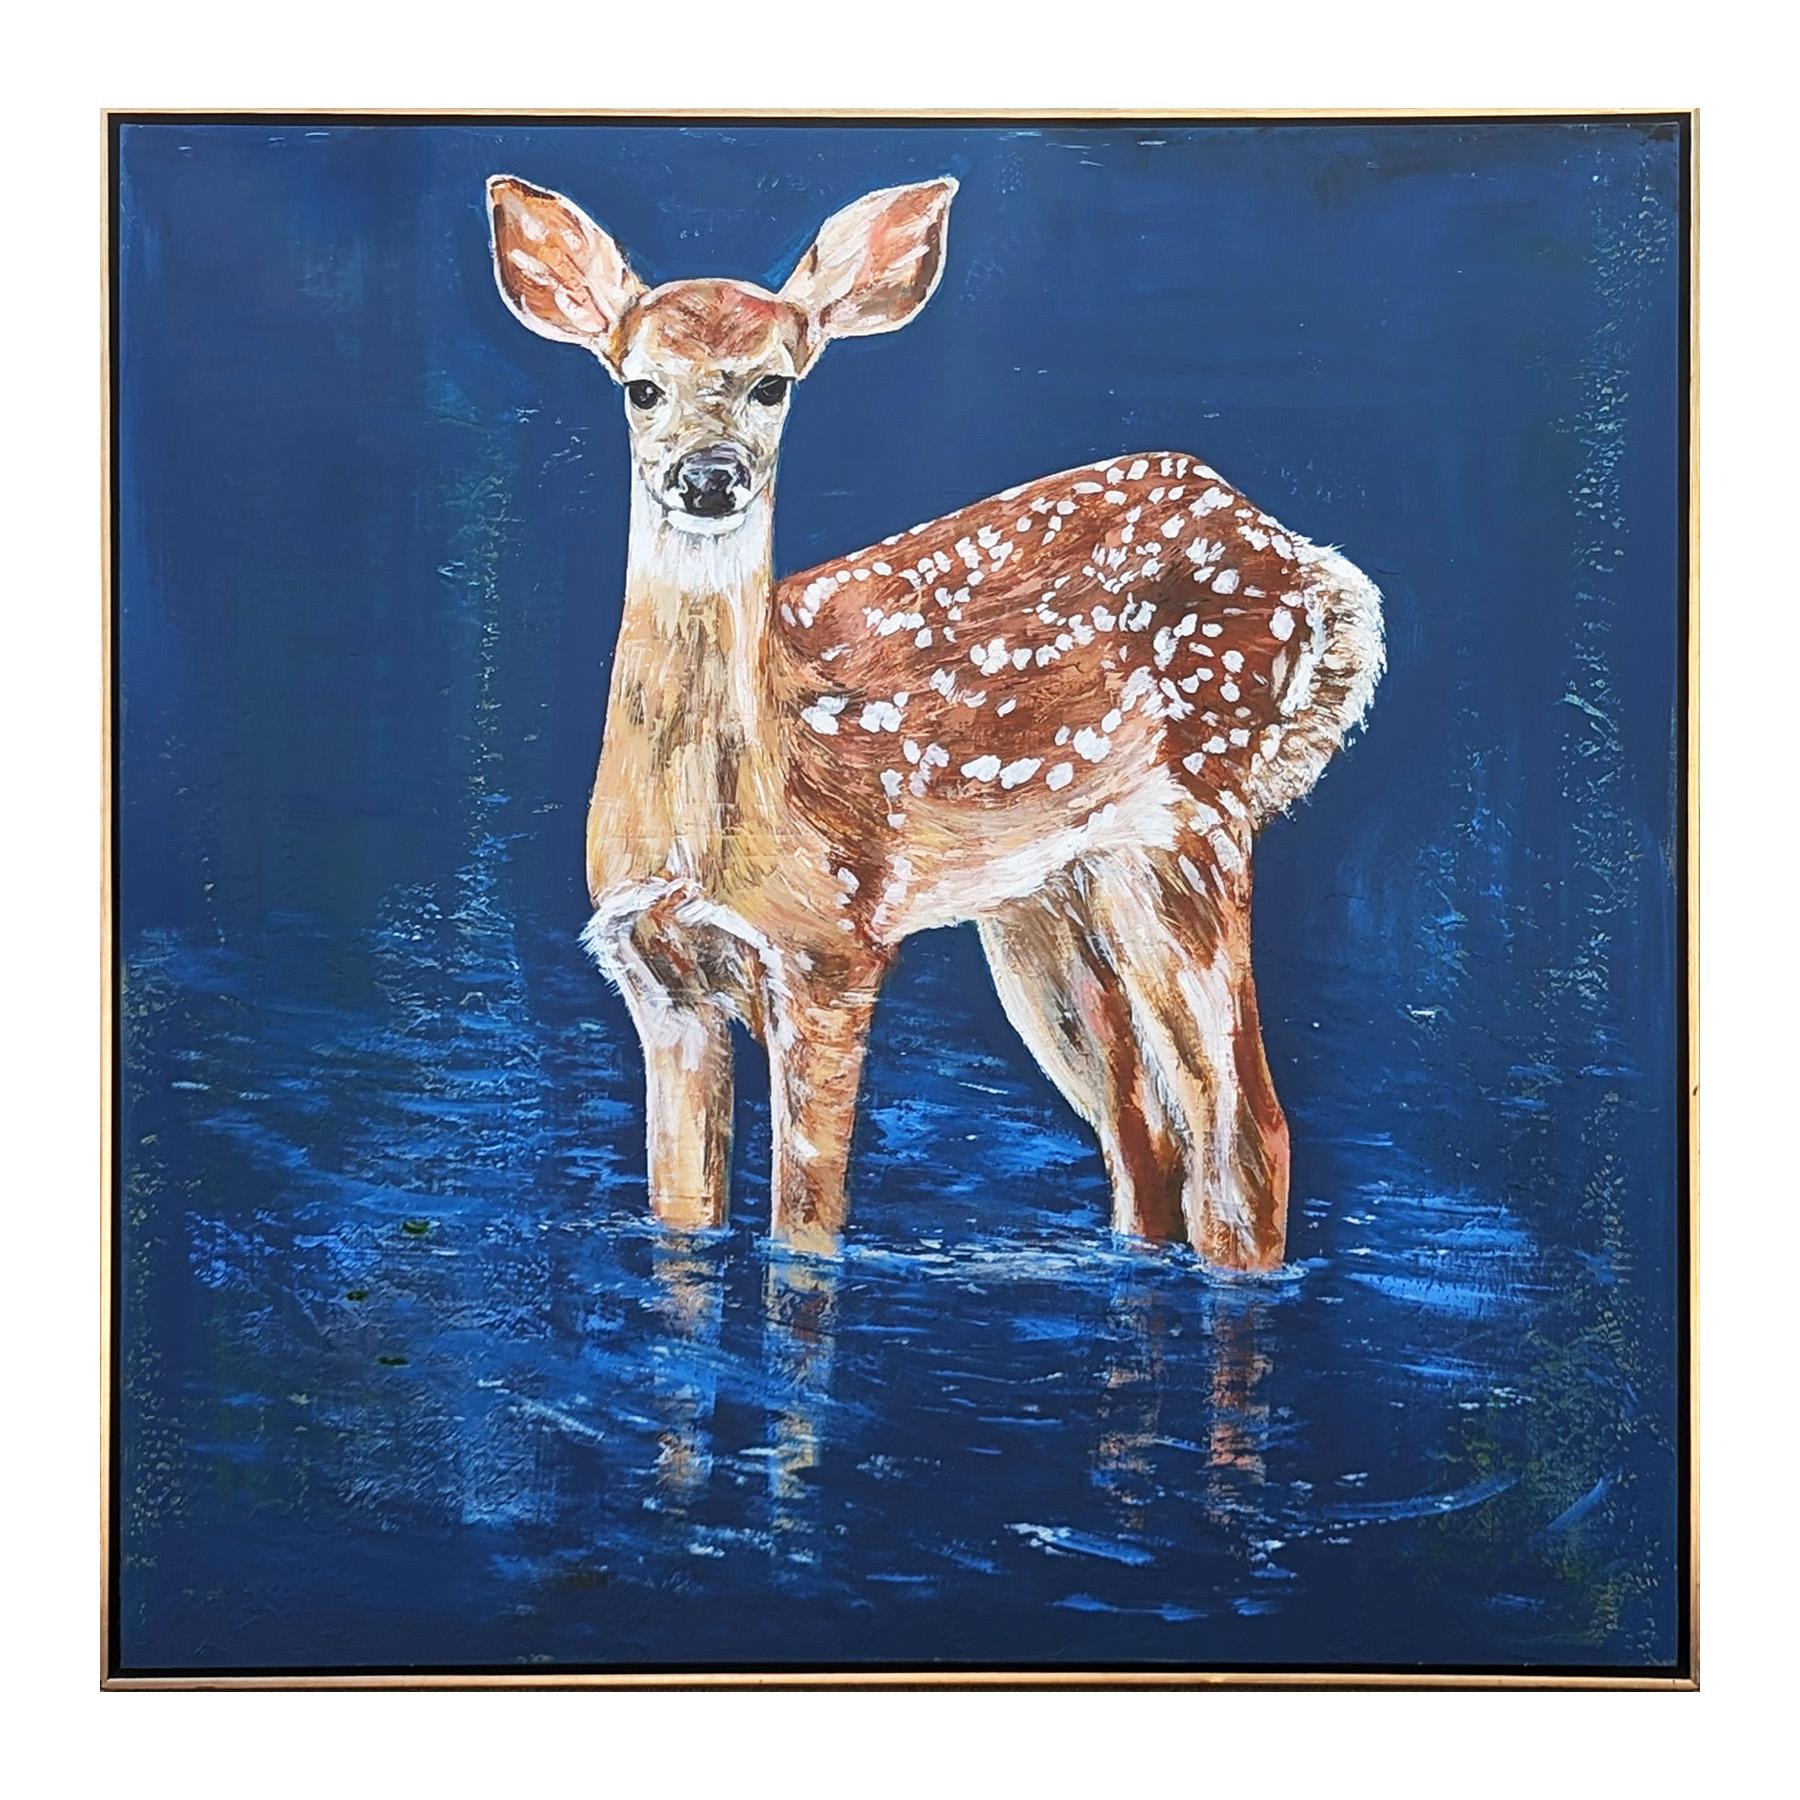 Naturalistic animal painting by contemporary Houston based artist Moisés Villafuerte. The work features a deer with white spots standing in a deep blue body of water. Currently hung in a gold floating frame. 

Dimensions Without Frame: H 50 in. x W